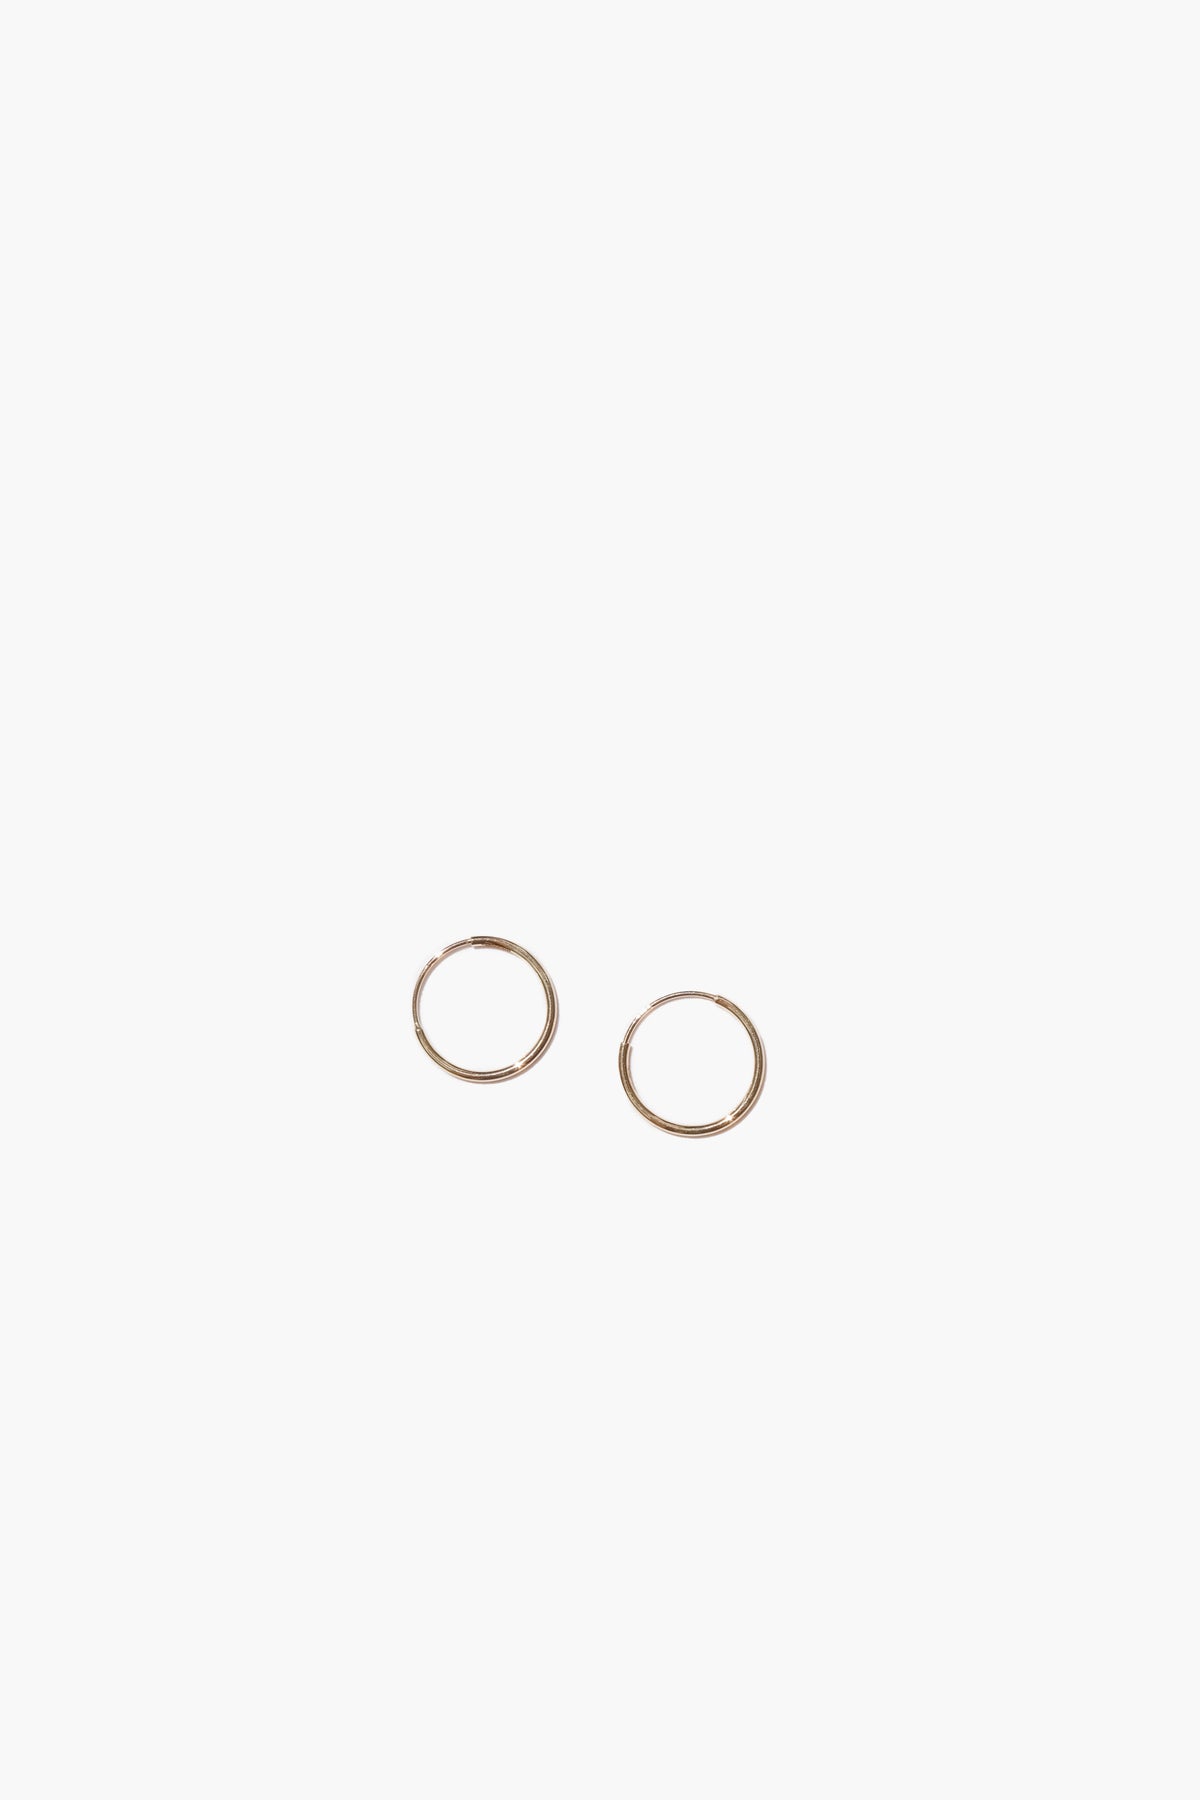 12mm Hoops - Solid 14k Gold